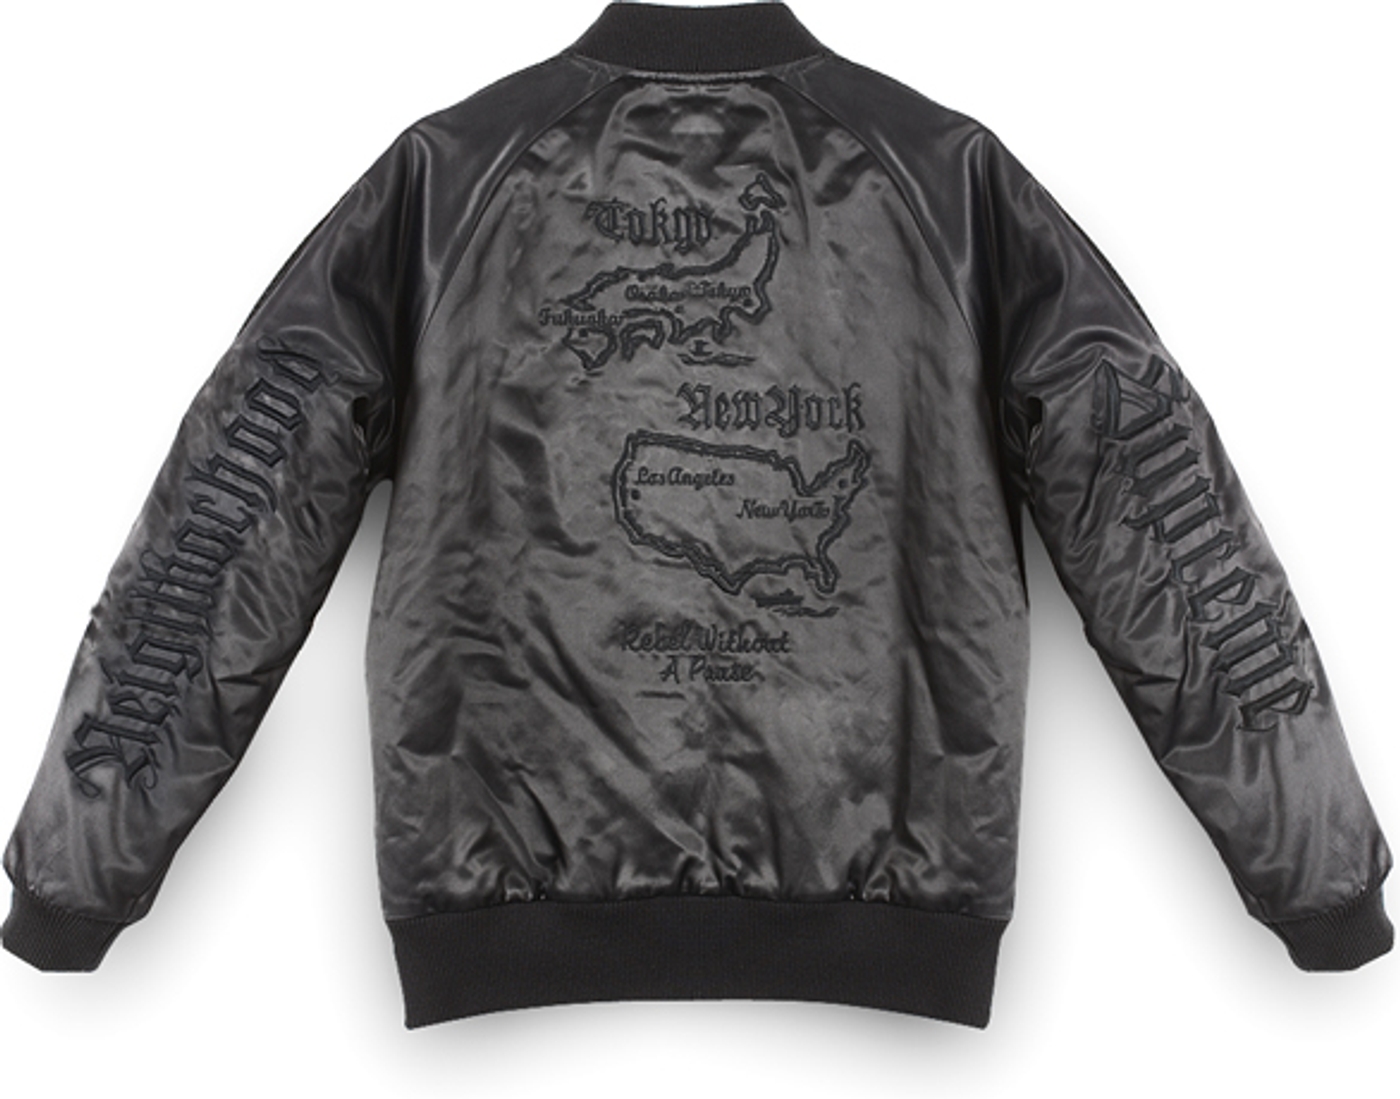 Baseball Jacket All satin. 
Exclusively for Supreme. (3/8)